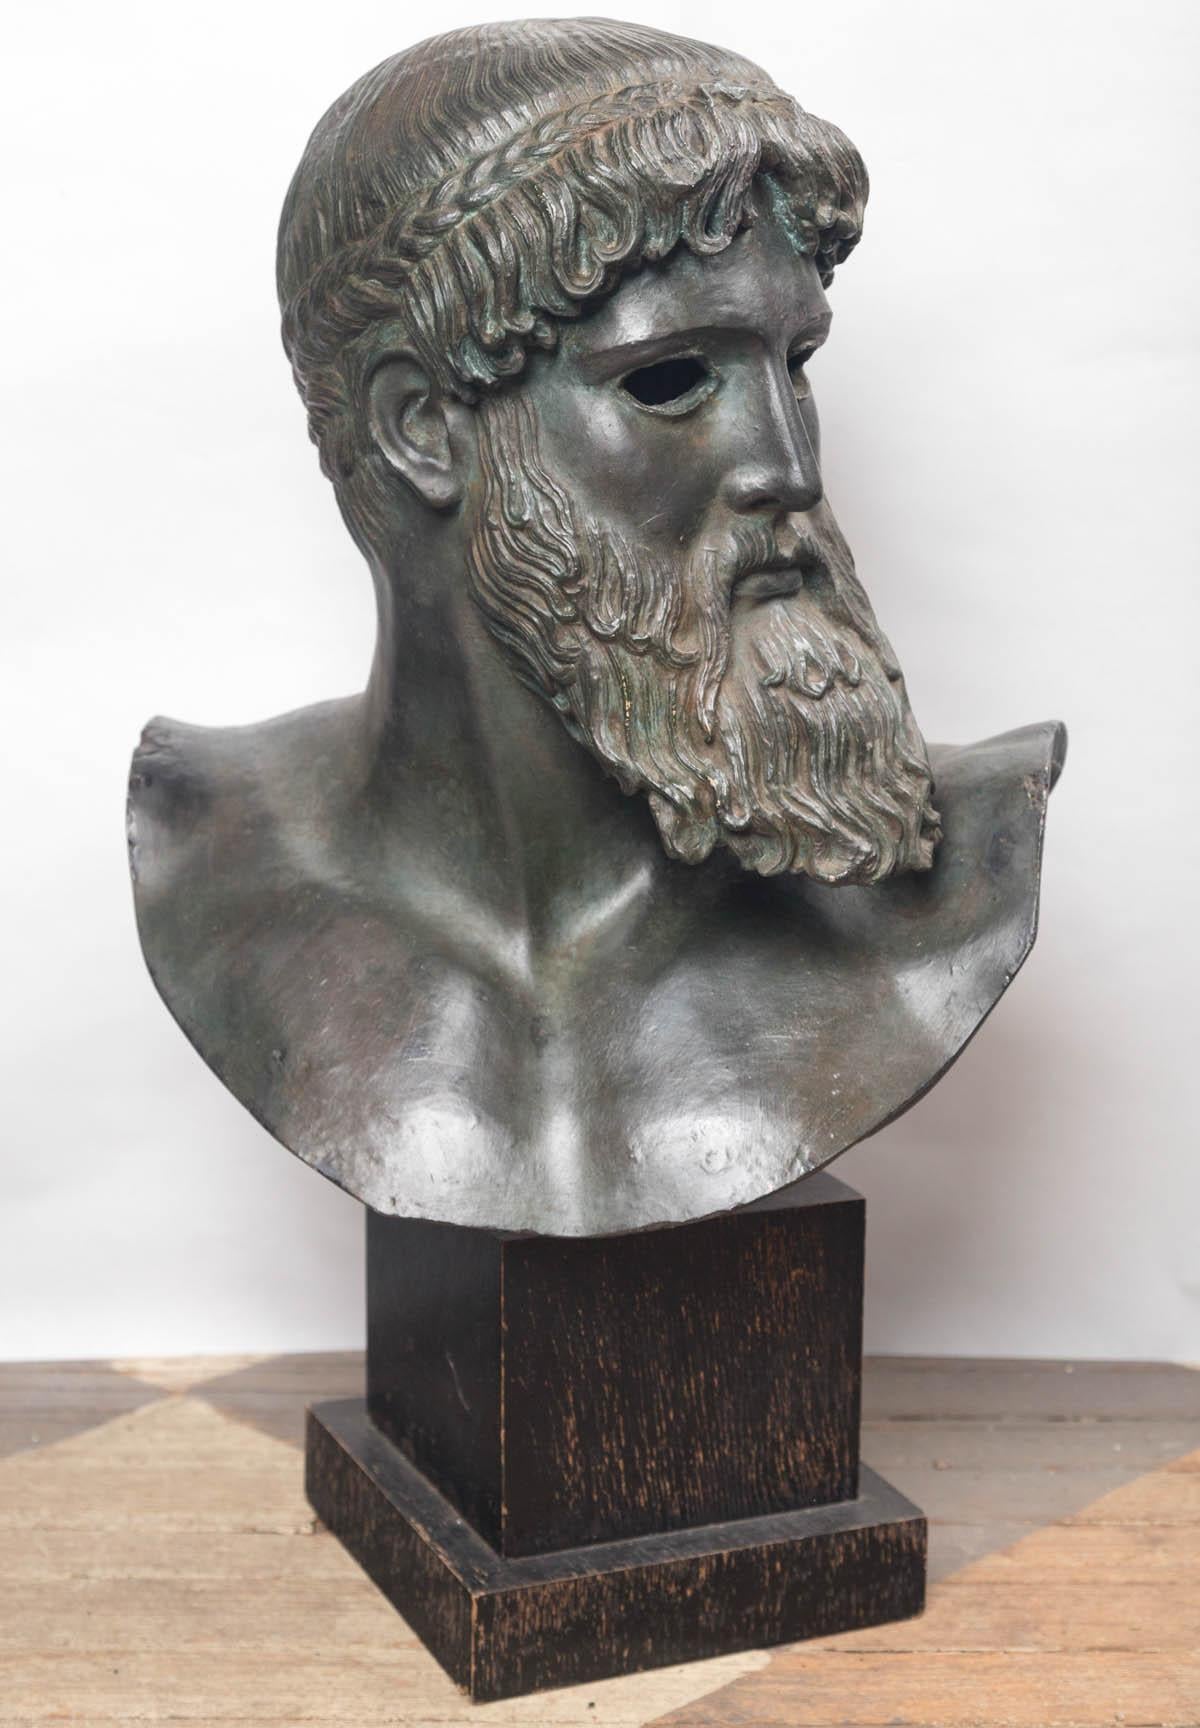 After the antique, sometimes also known as a bust of Zeus. This head is a copy from one full figure statue of Poseidon in the act of throwing a spear. It as a painted finish, and waxed to simulate bronze. The bust alone is 18 inches tall. It is